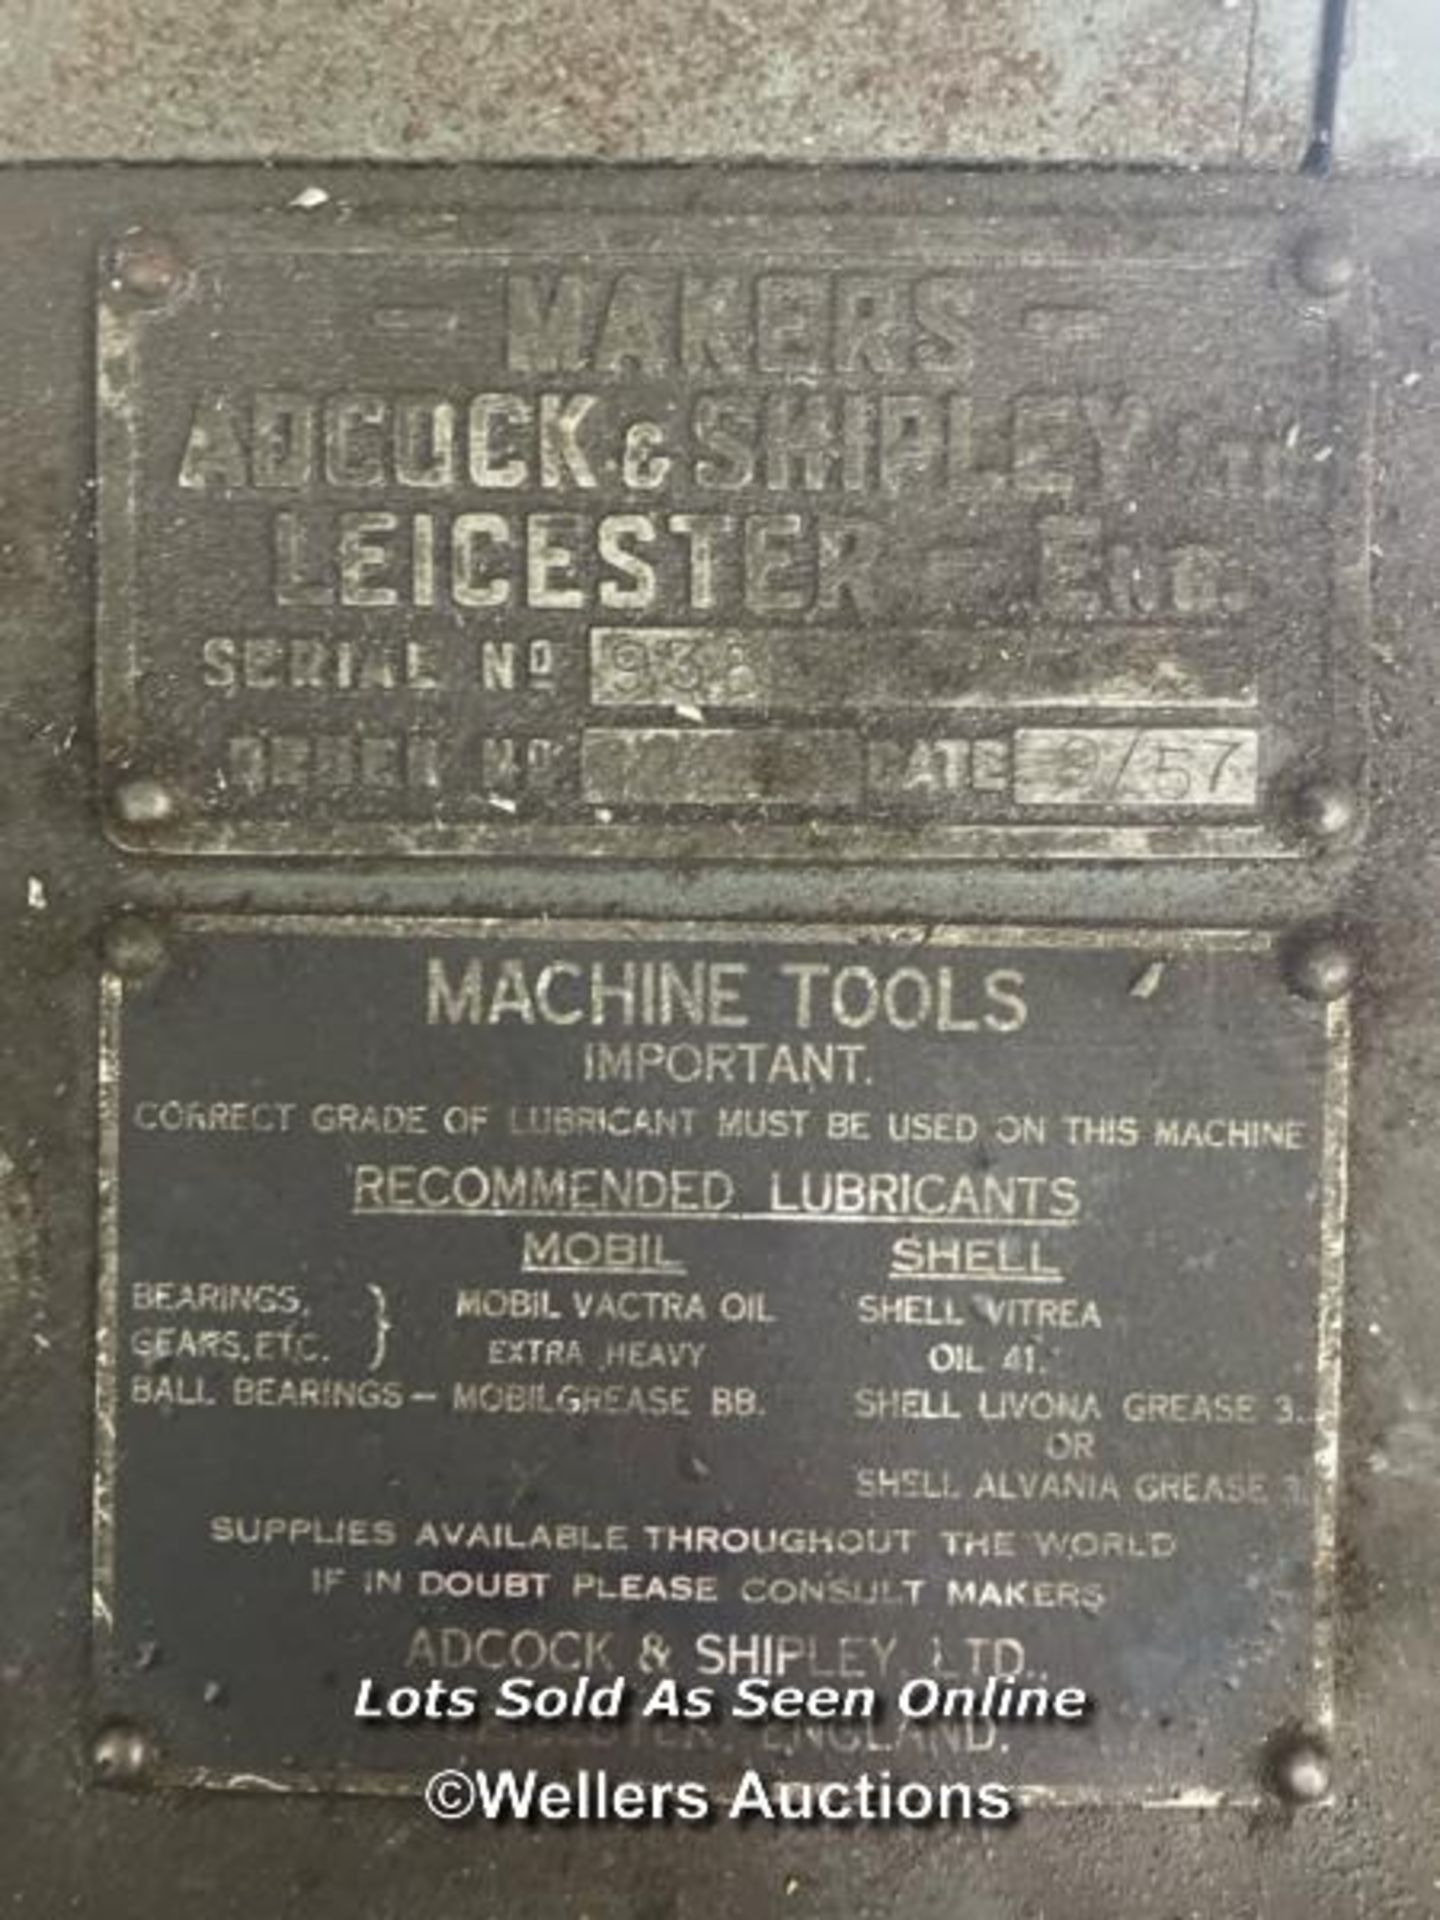 ADCOCK AND SHIPLEY LTD. LEVER ACTION HORIZONTAL MILL, 3 PHASE, IN WORKING ORDER - Bild 2 aus 6